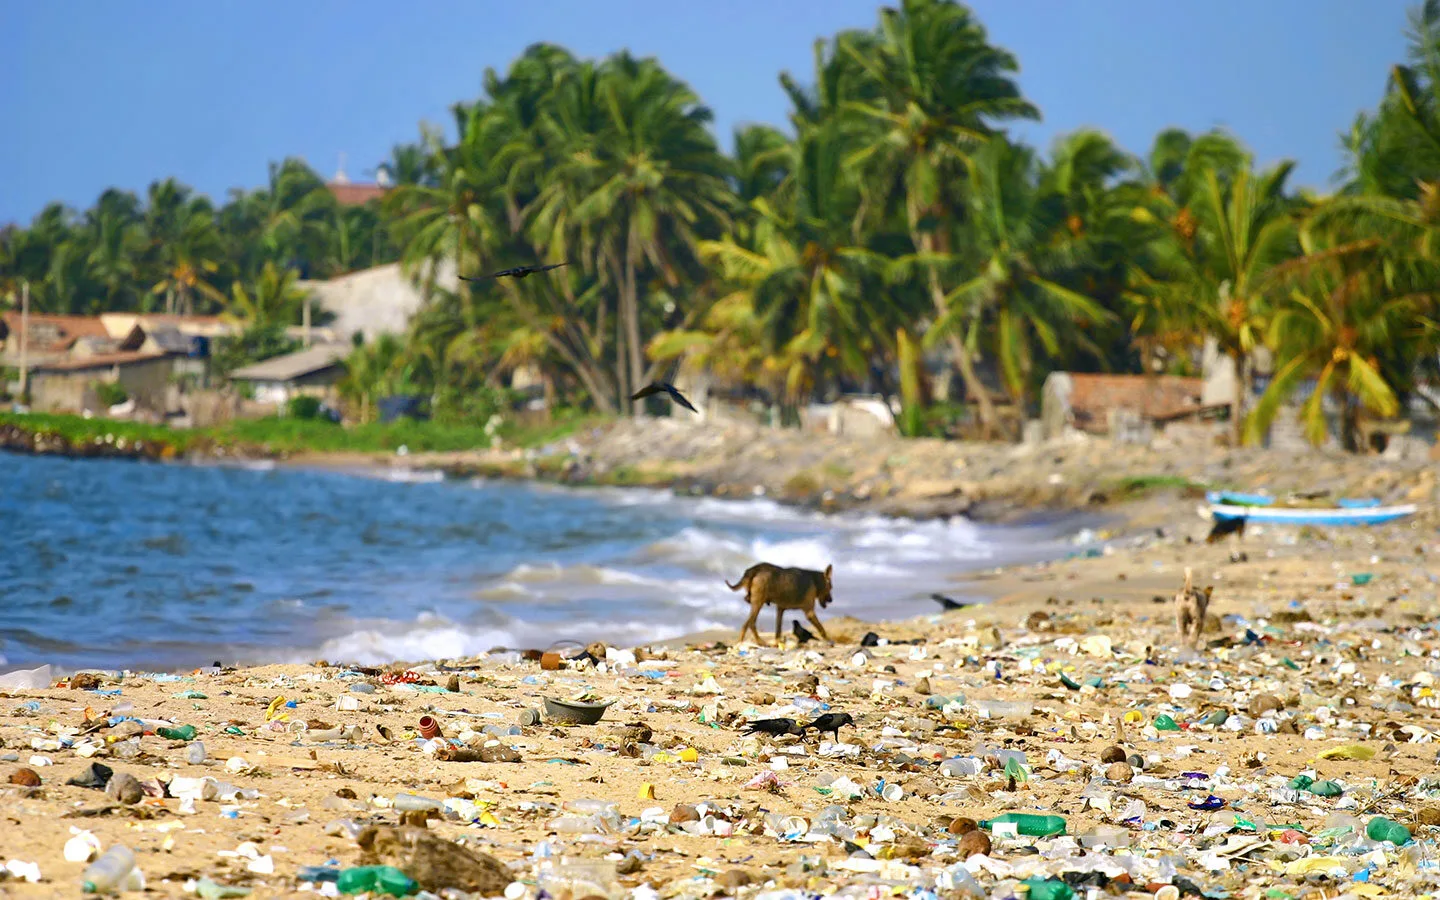 Plastic pollution covering a tropical beach